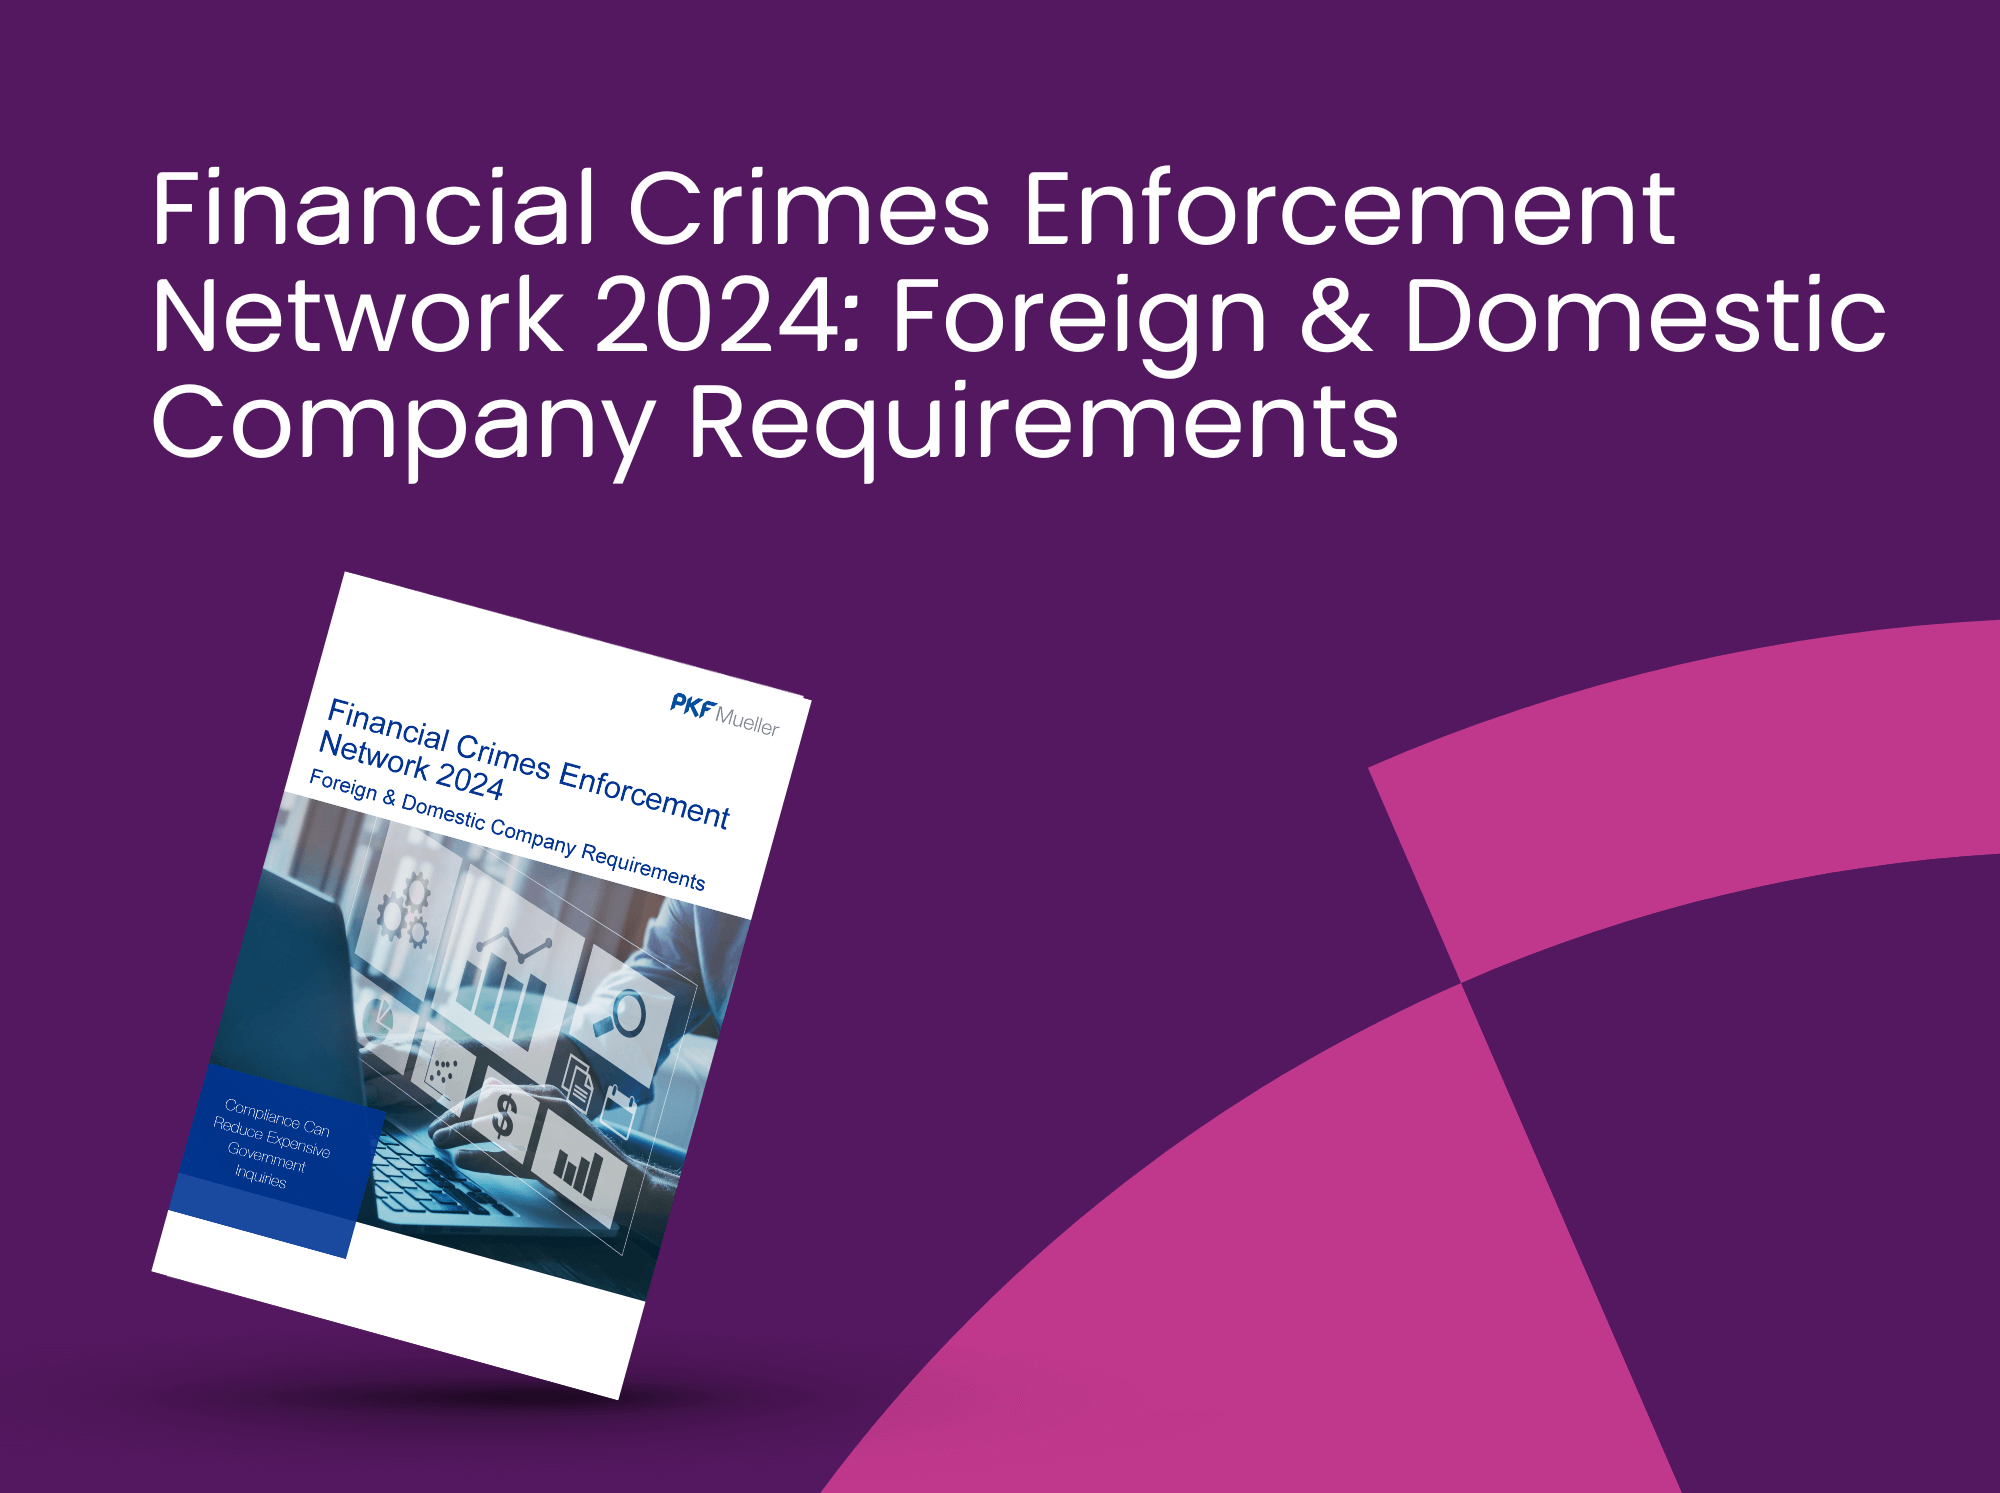 Financial Crimes Enforcement Network 2024: Foreign & Domestic Company Requirements